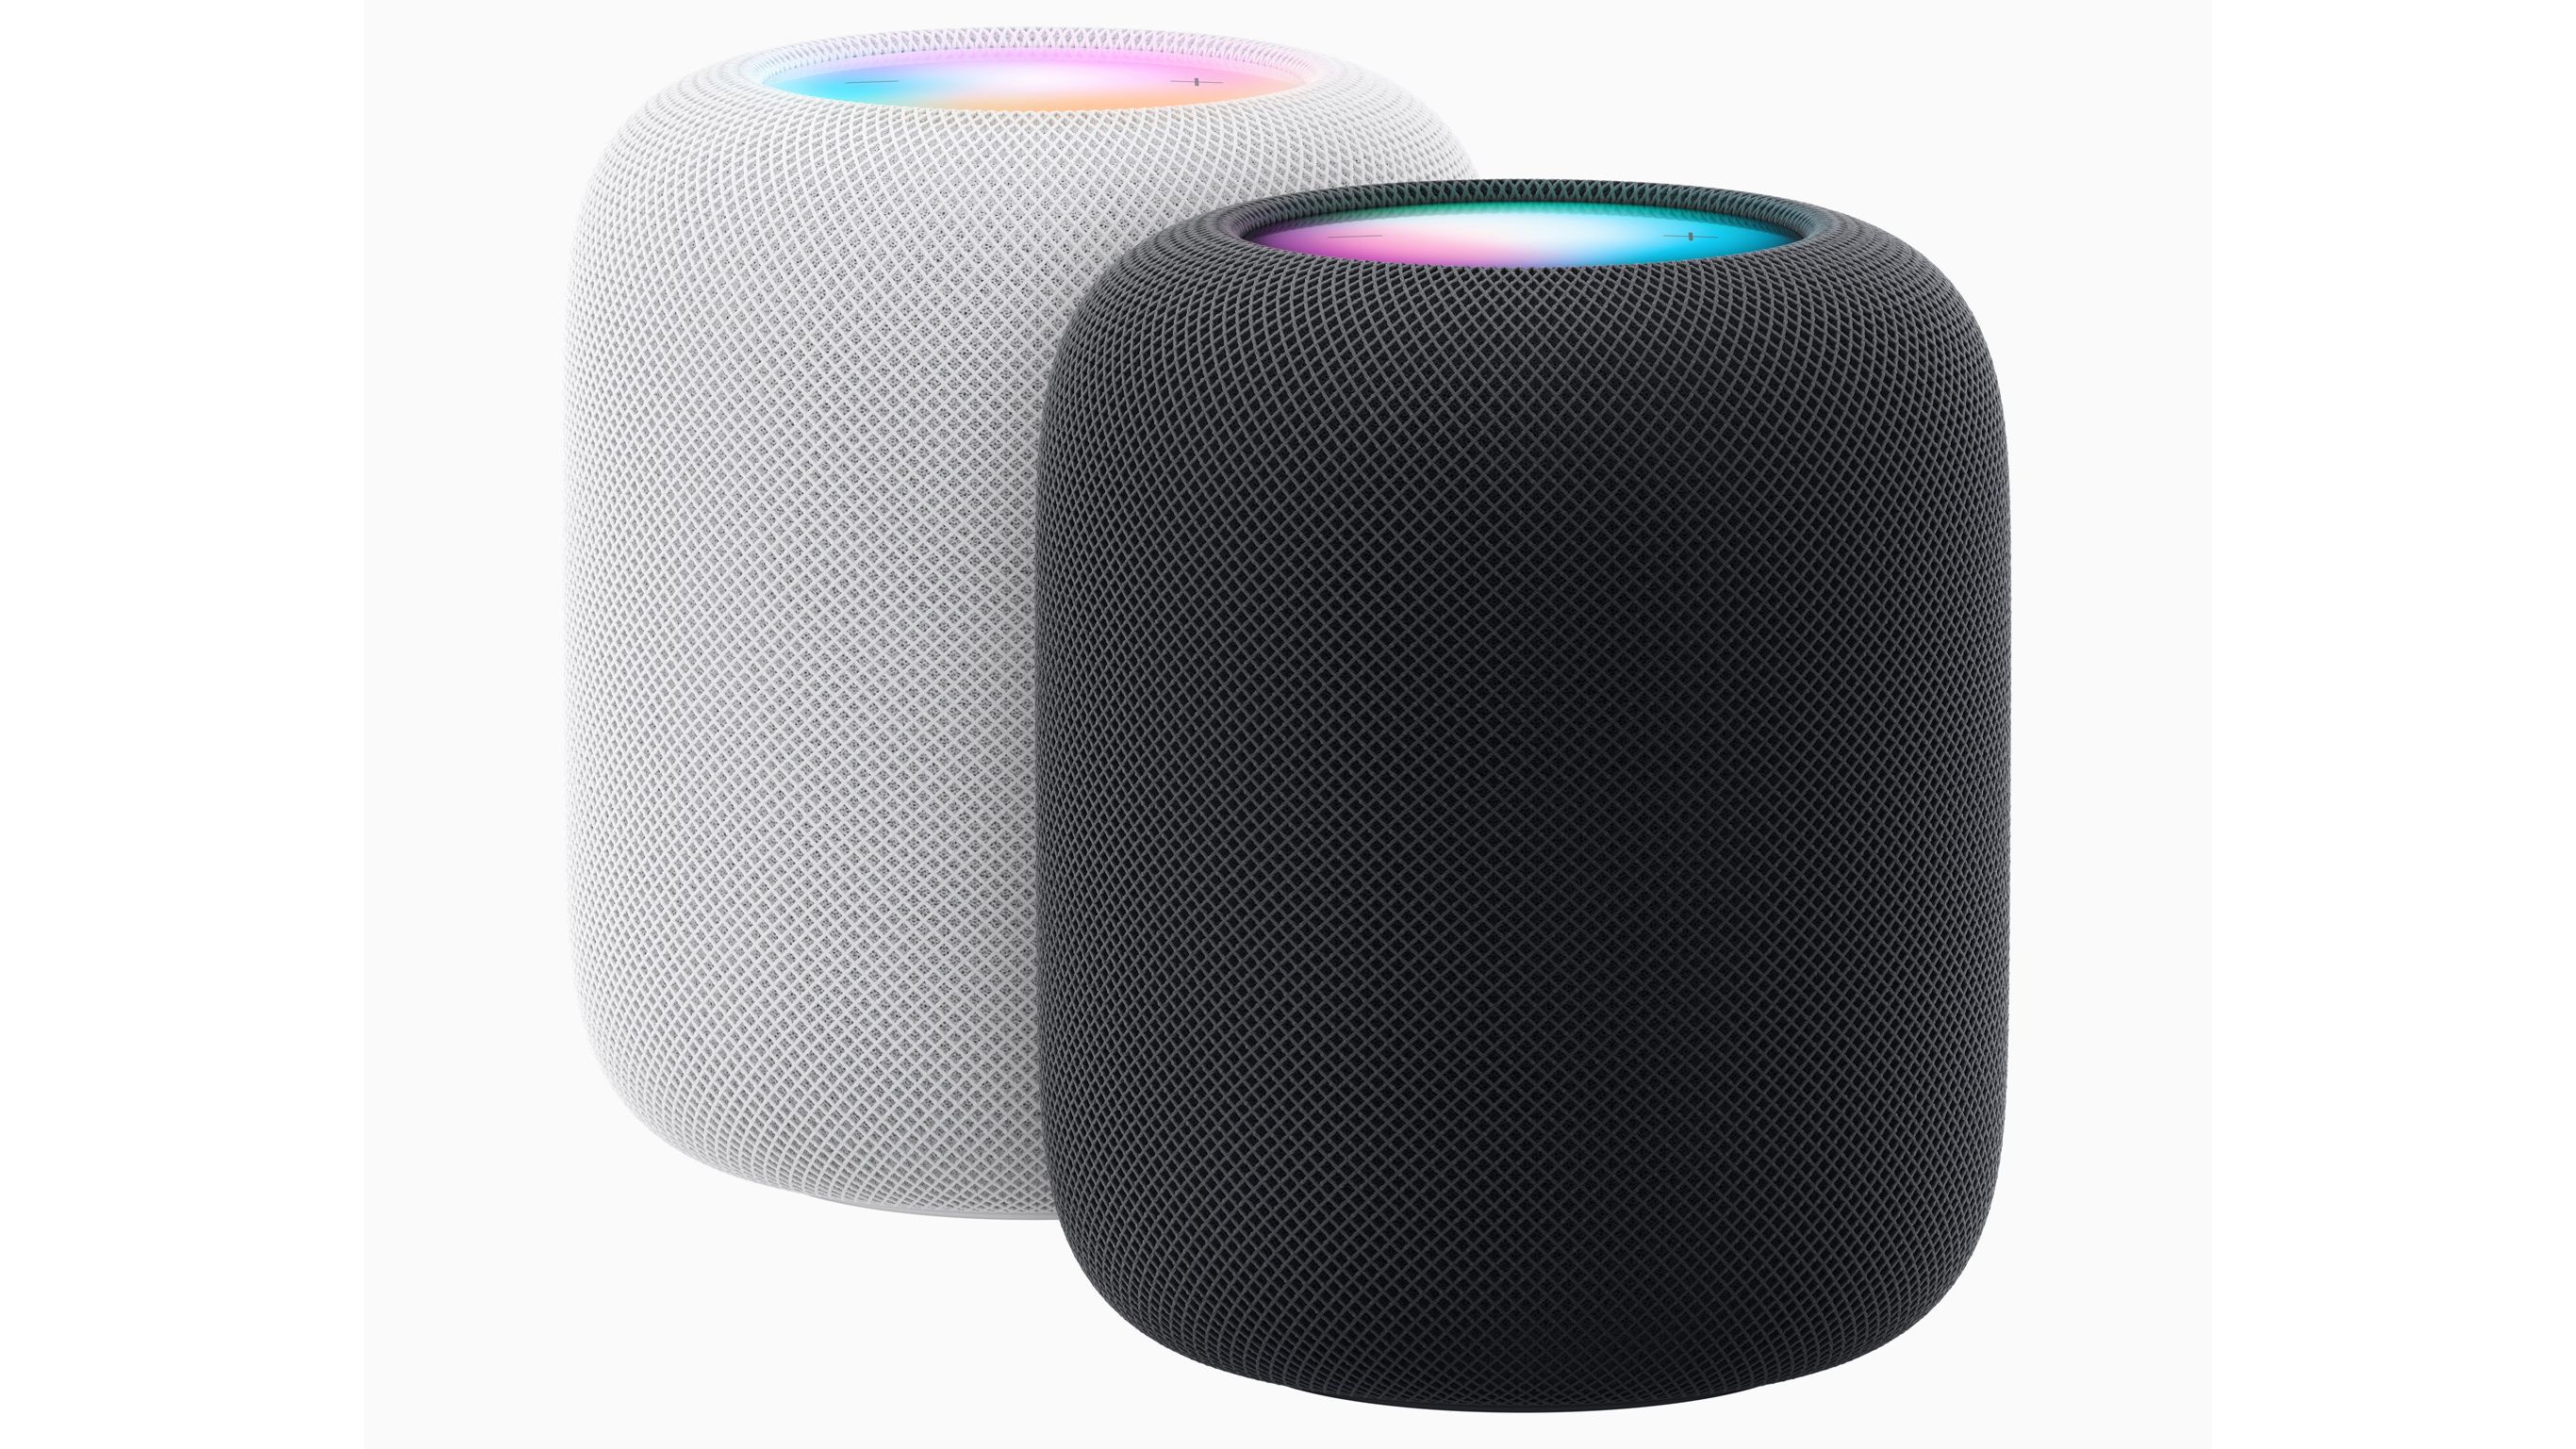 to add Matter-over-Thread support to Echo devices this spring